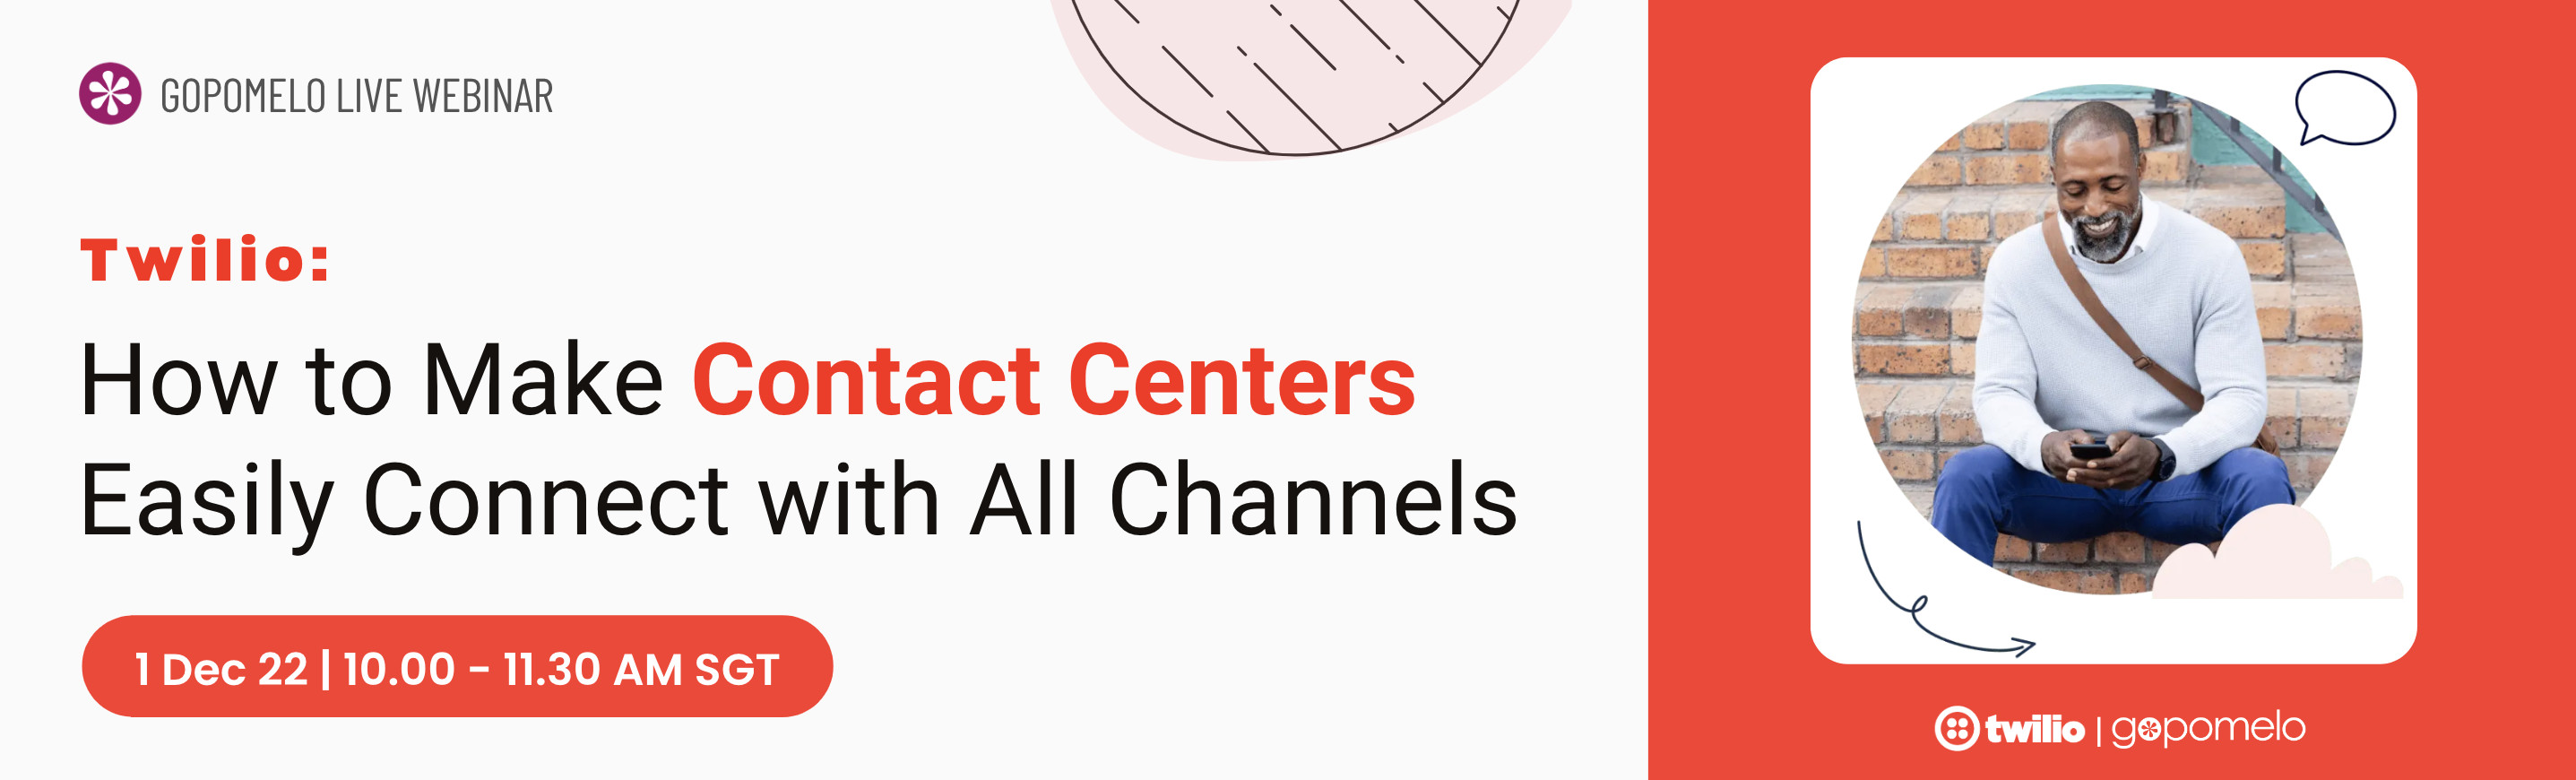 How to Make Contact Centers Easily Connect with All Channels